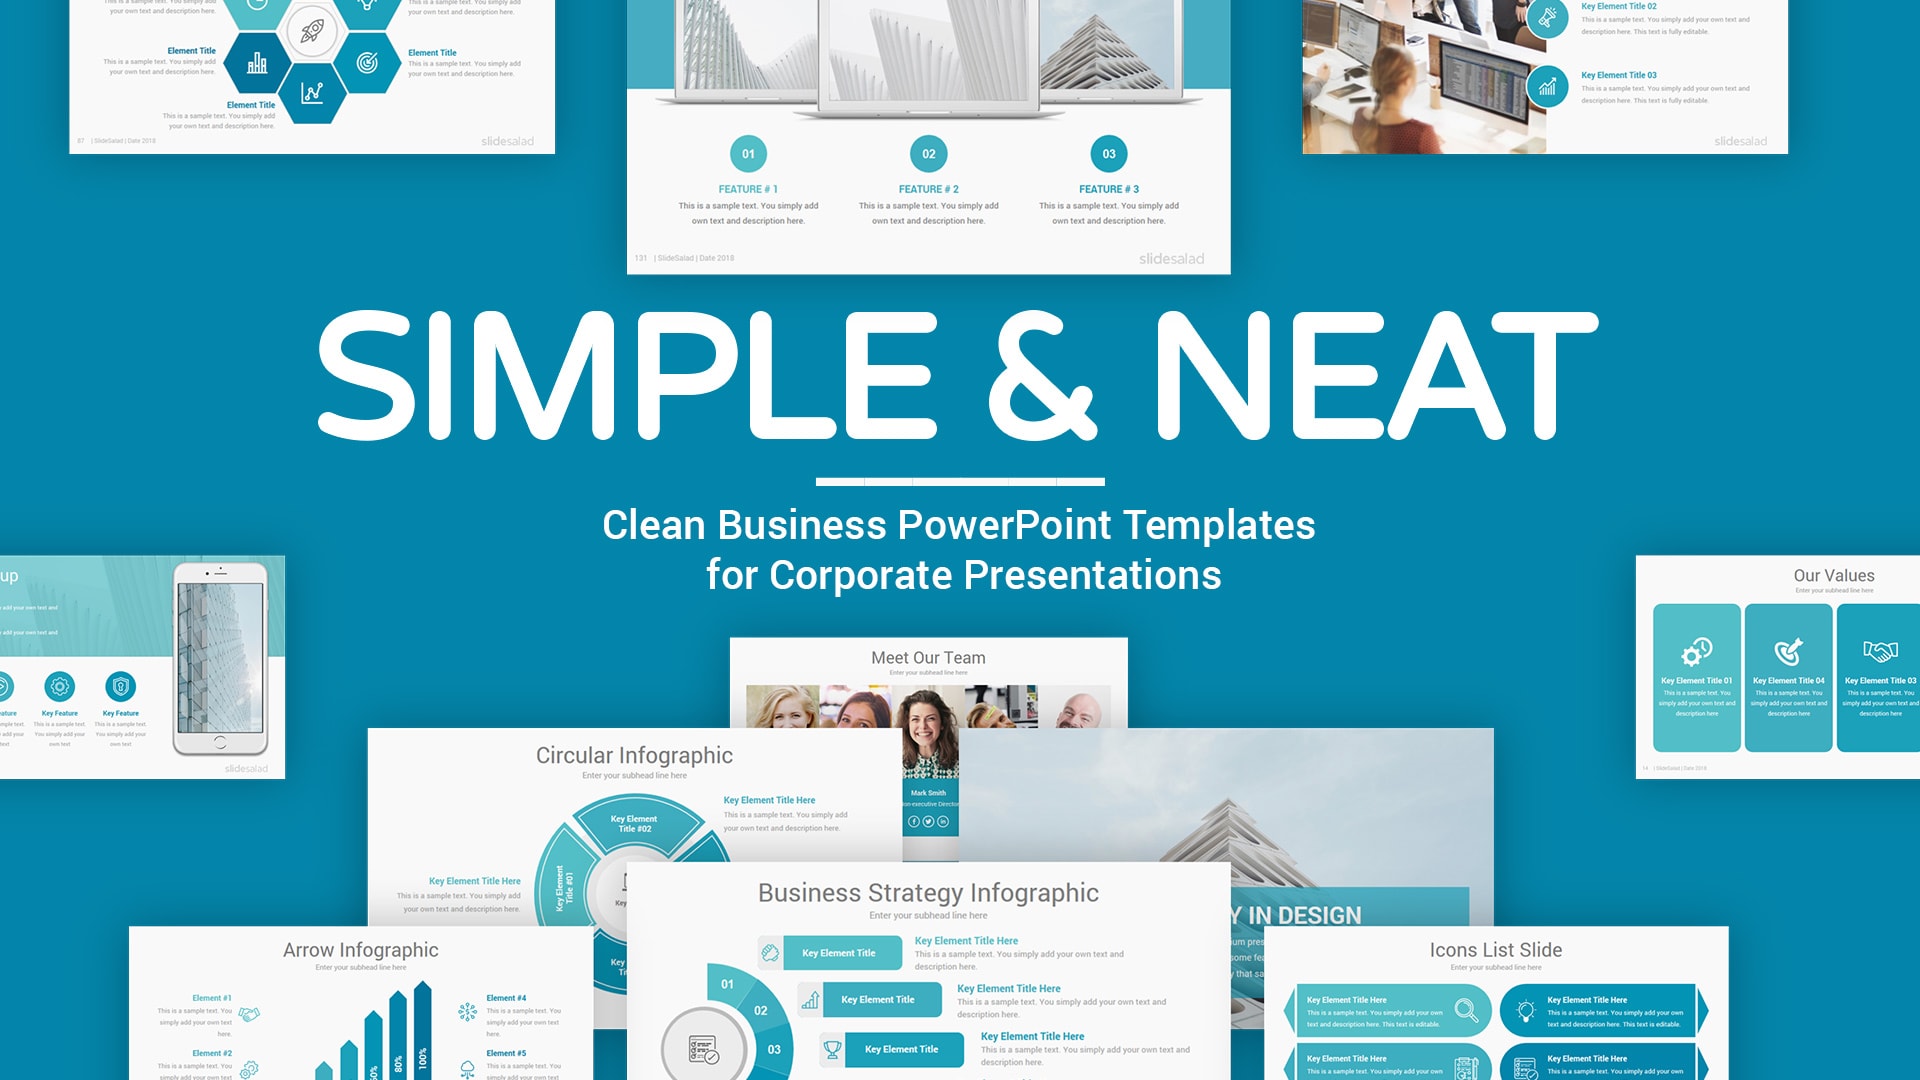 Best Creative PowerPoint Presentation Templates for 22 - SlideSalad Throughout Ppt Presentation Templates For Business